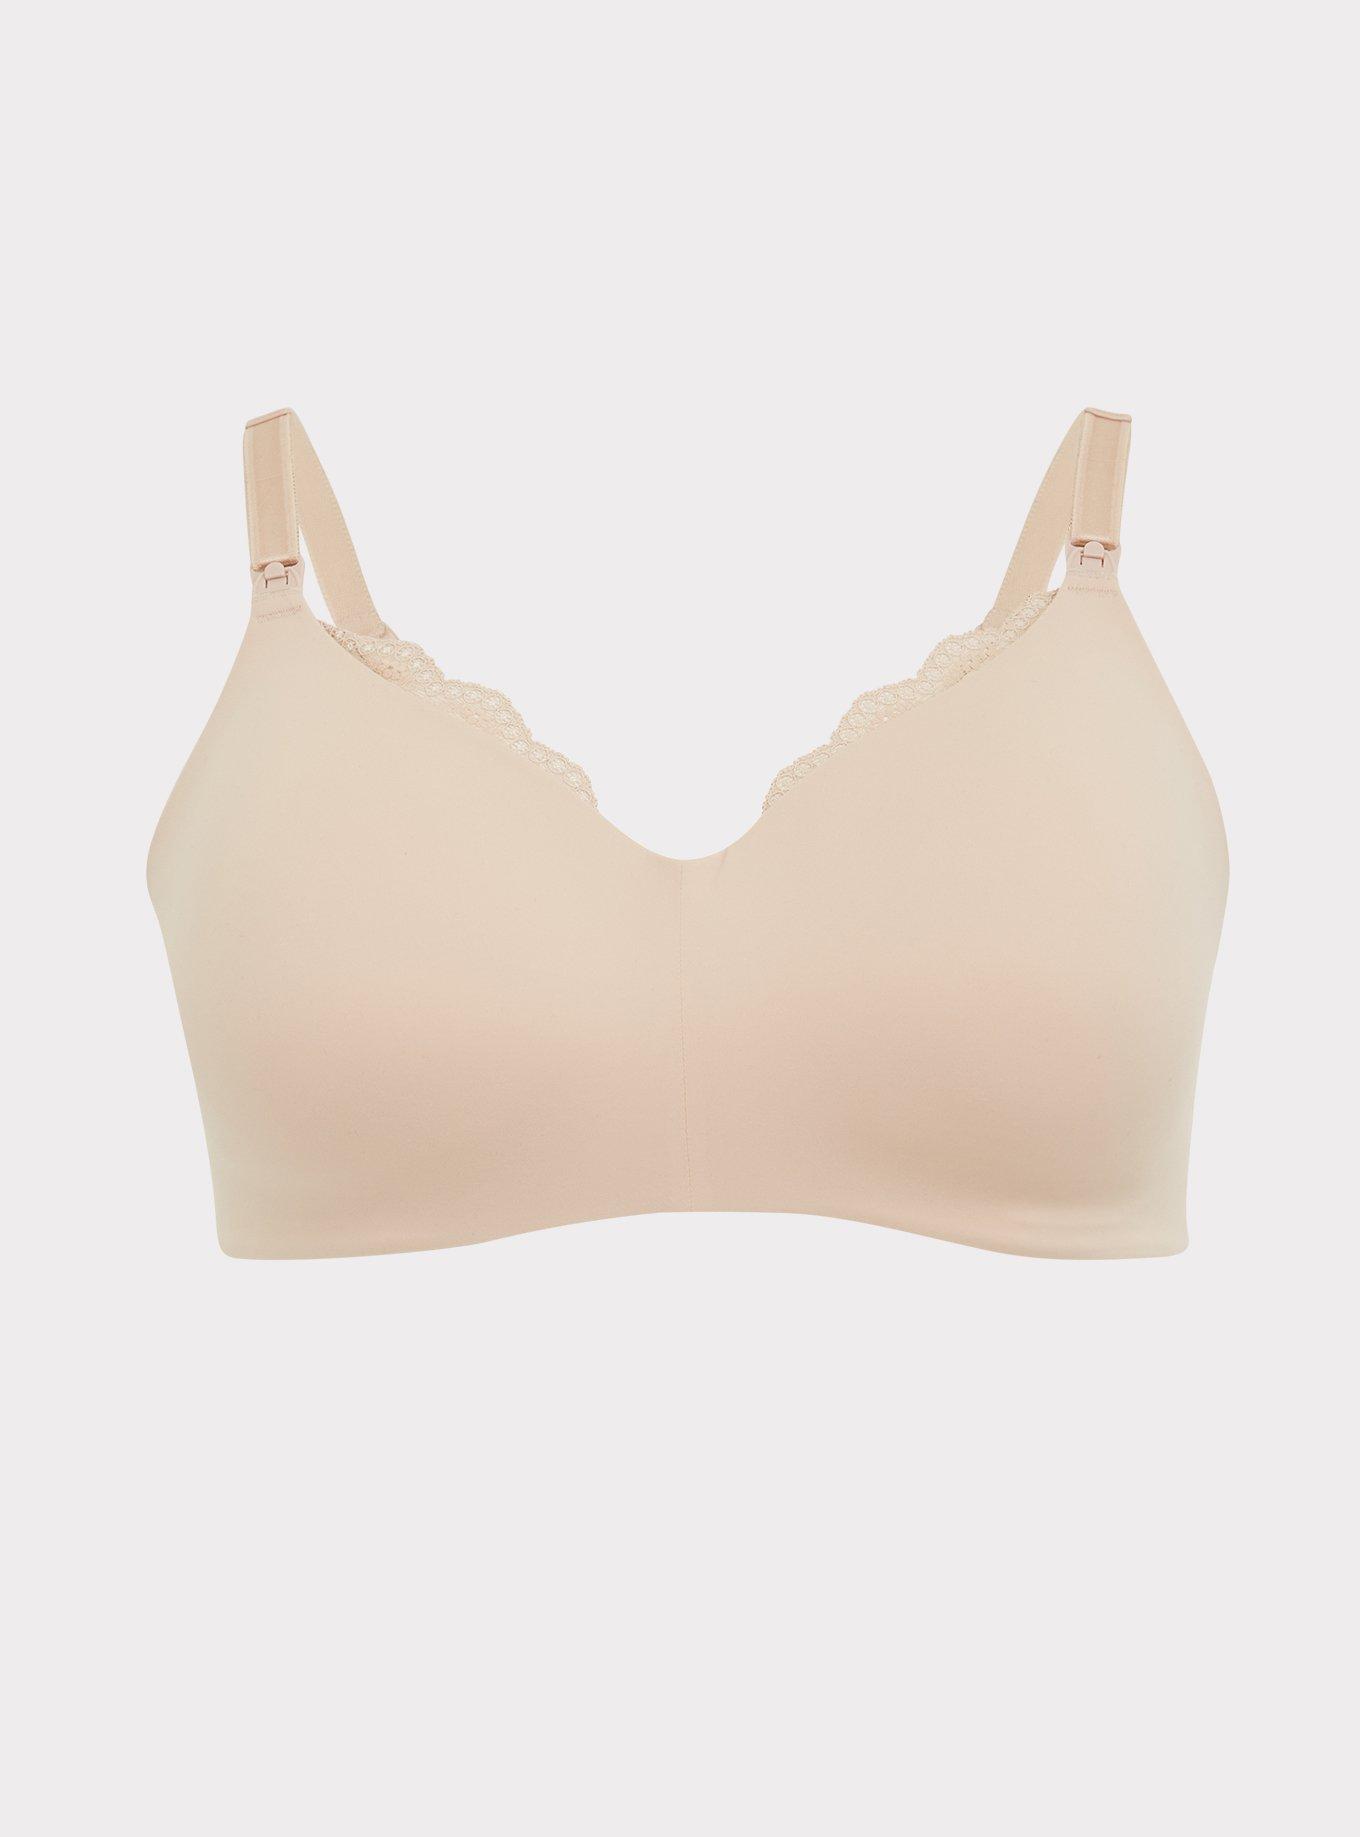 Penningtons - Fact: we make bras that are as comfy as they look